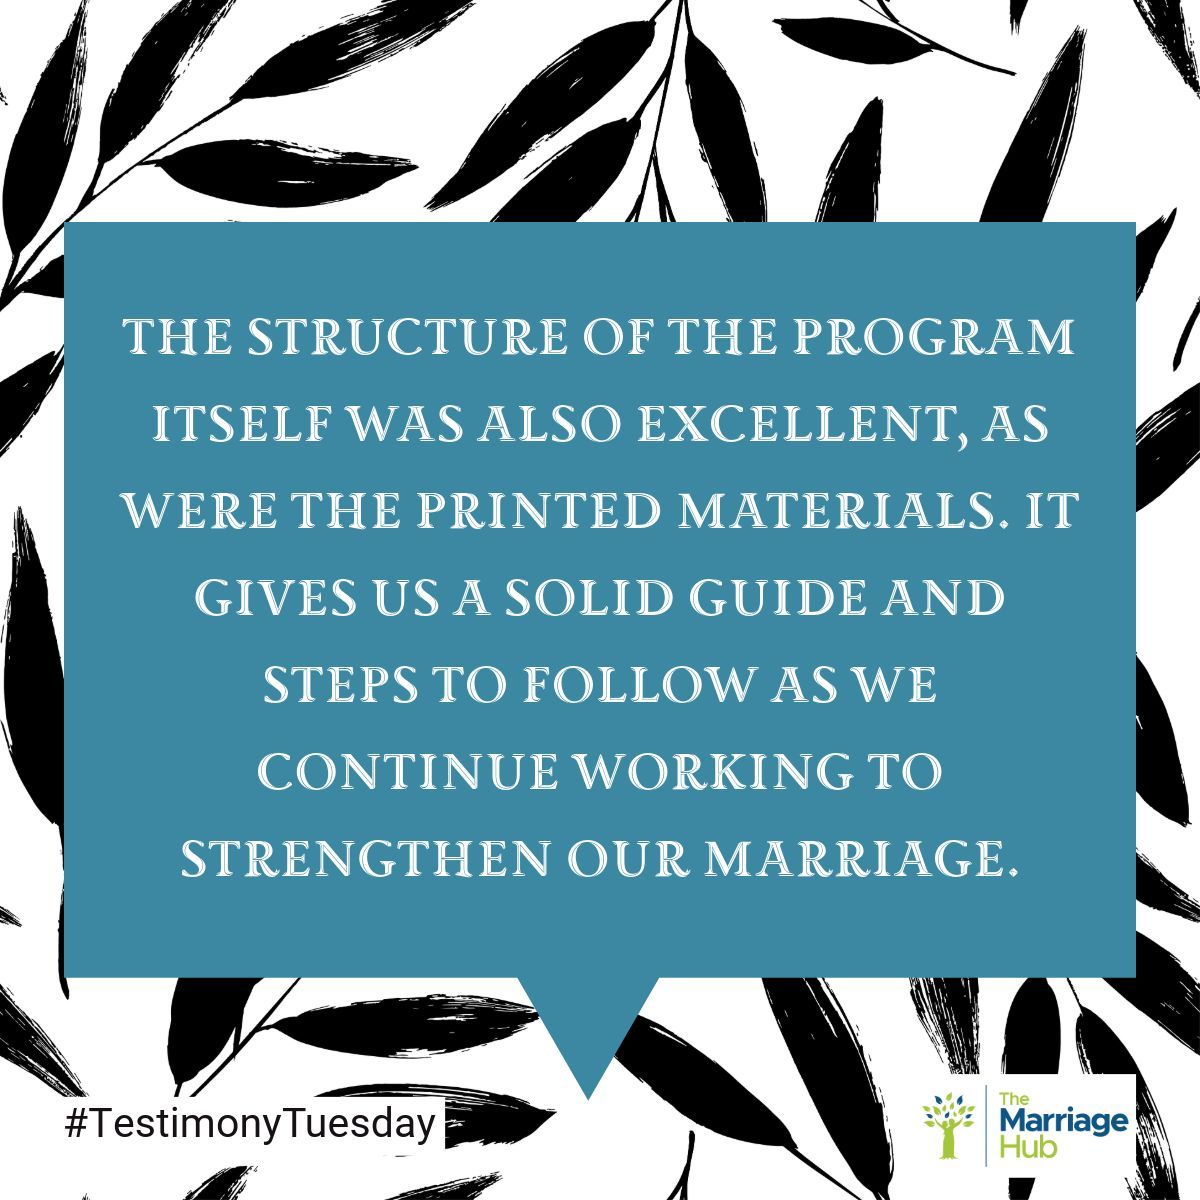 Glad that we could give this couple materials to strengthen their marriage.

#Testimony #TestimonyTuesday #TheMarriageHub #HouseOnTheRock #Marriage